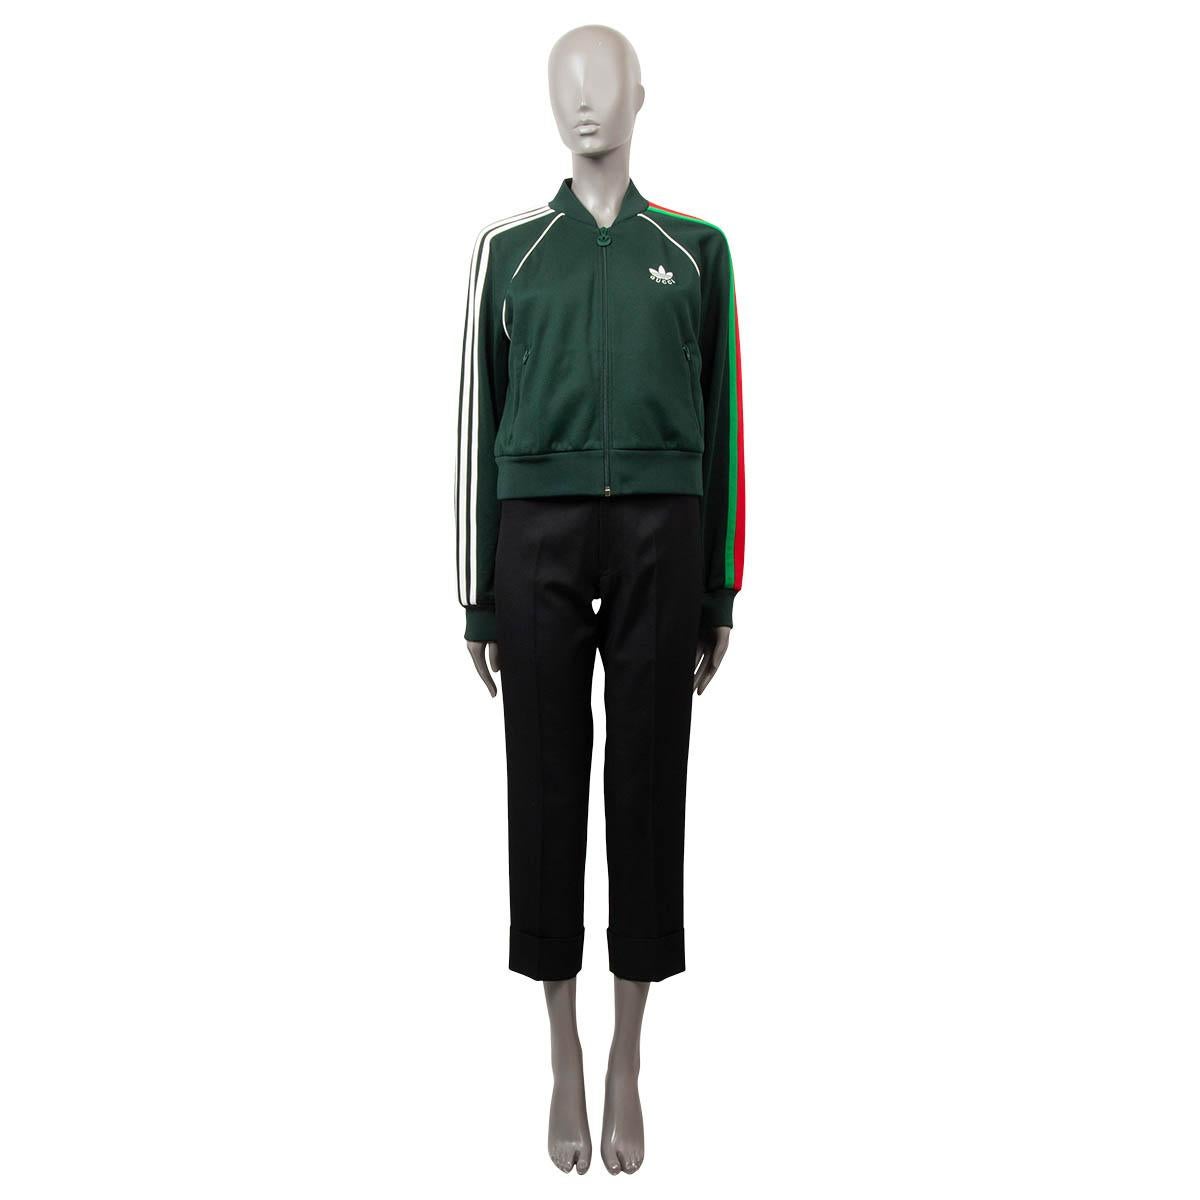 100% authentic Gucci x Adidas collection bomber jacket in forest green poyester (55%) and cotton (45%) jersey. This zip jacket features Gucci Trefoil embroidery, 3-stripes and green/red Gucci Web appliqué on the sleeves. The collection sees both